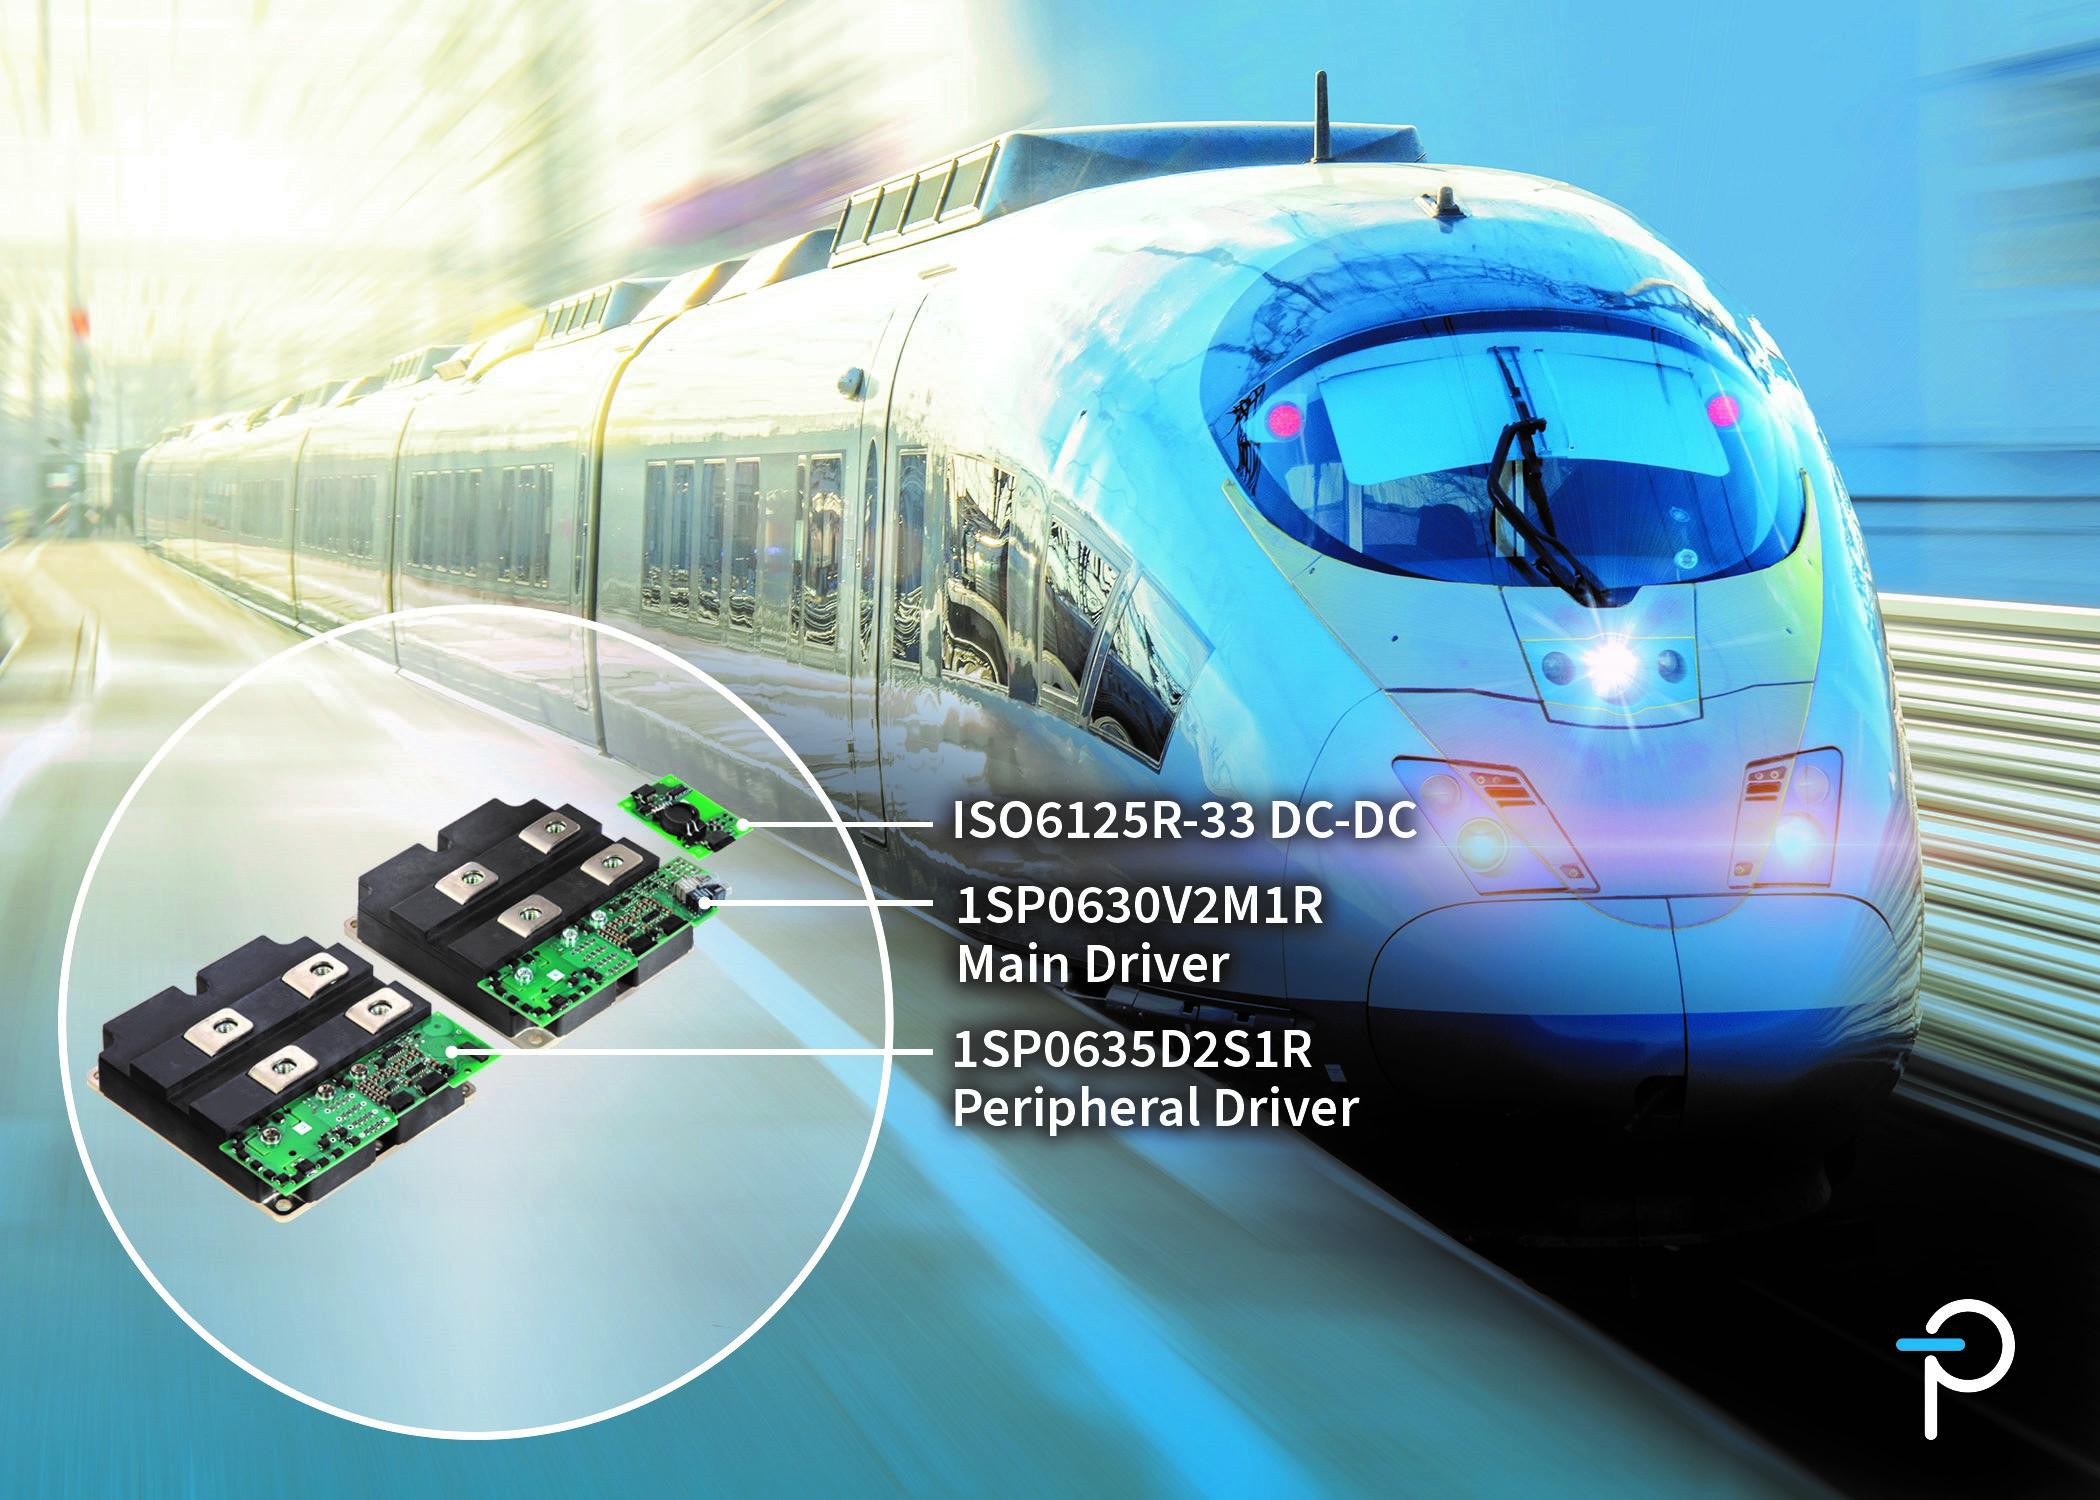 Plug-and-Play Gate Driver Targets Railway Applications